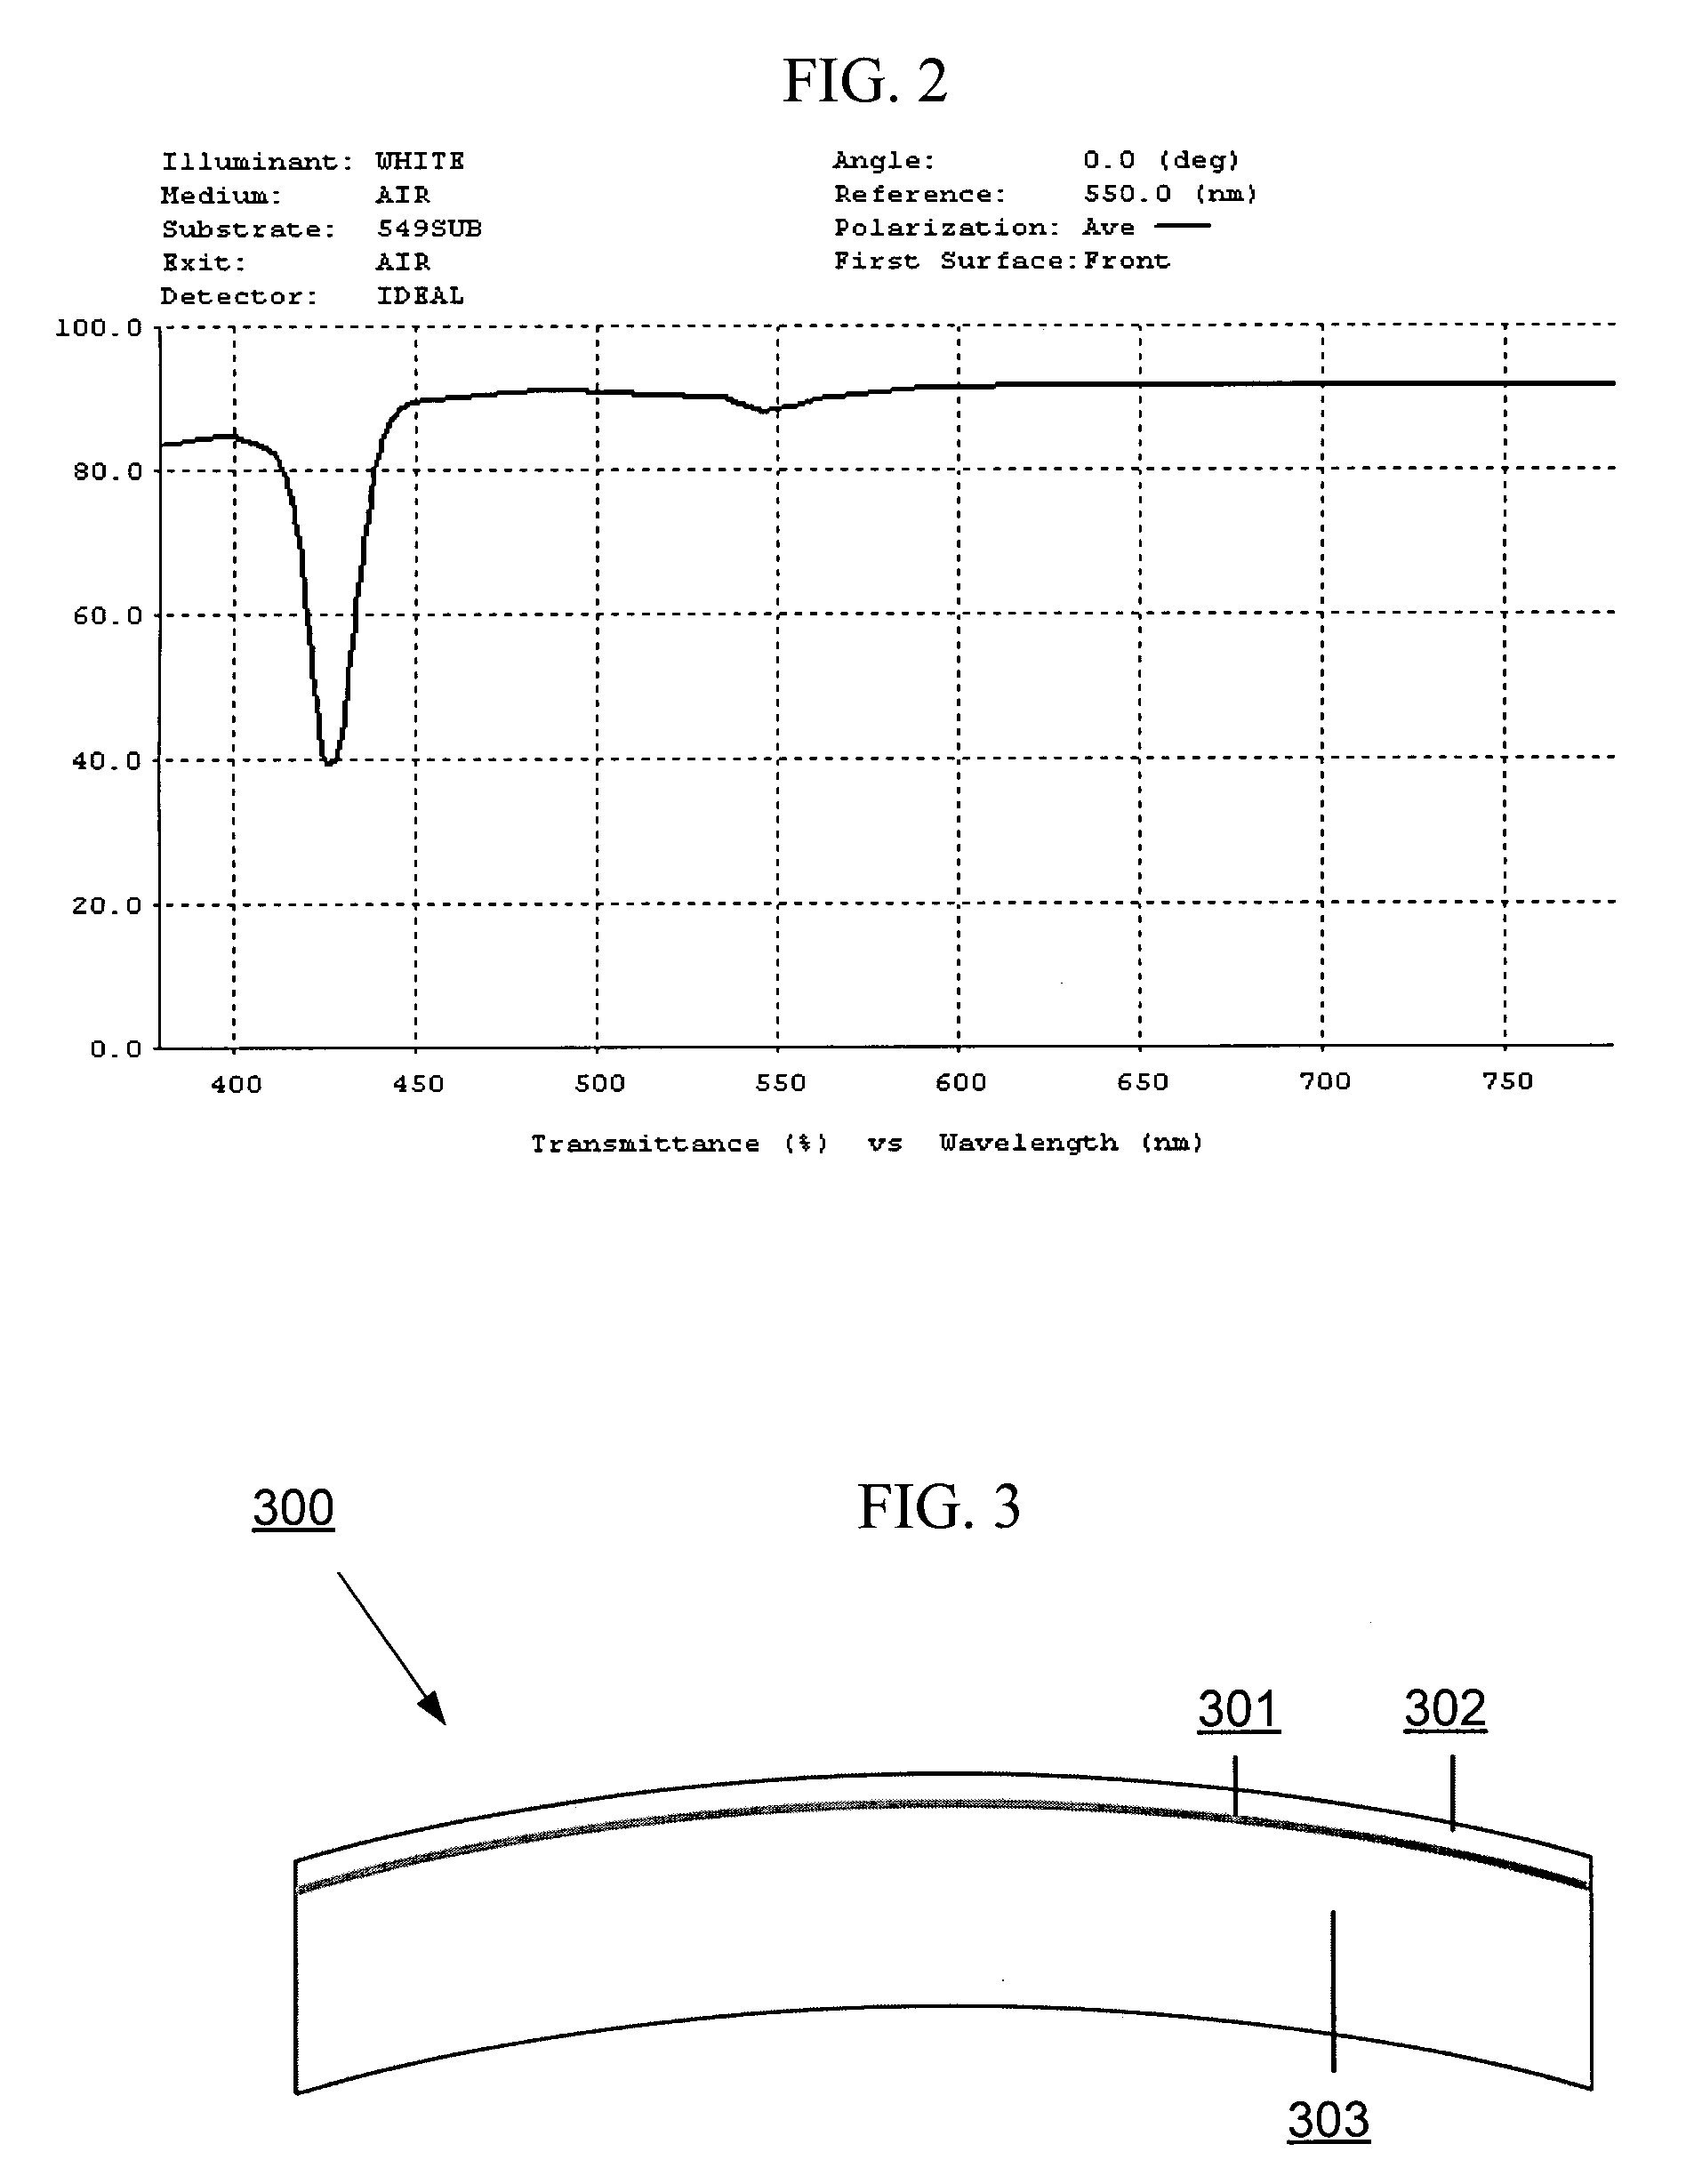 System and method for selective light inhibition